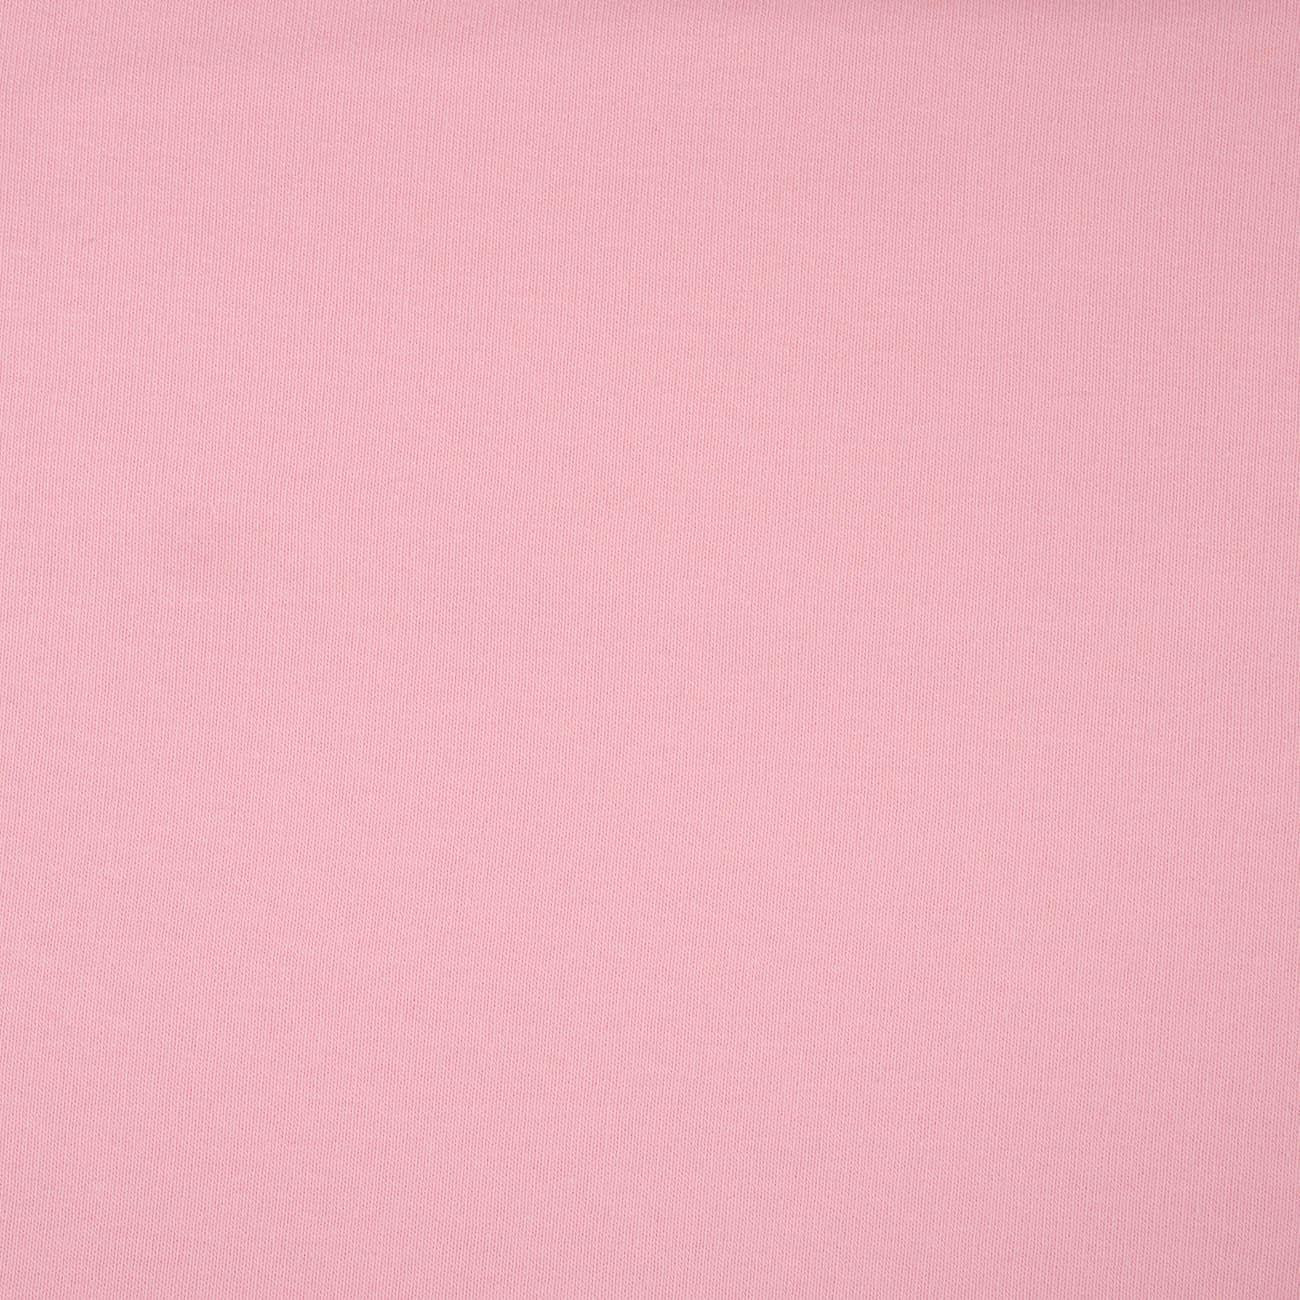 POWDER PINK - Cotton water-repellent fabric 320g